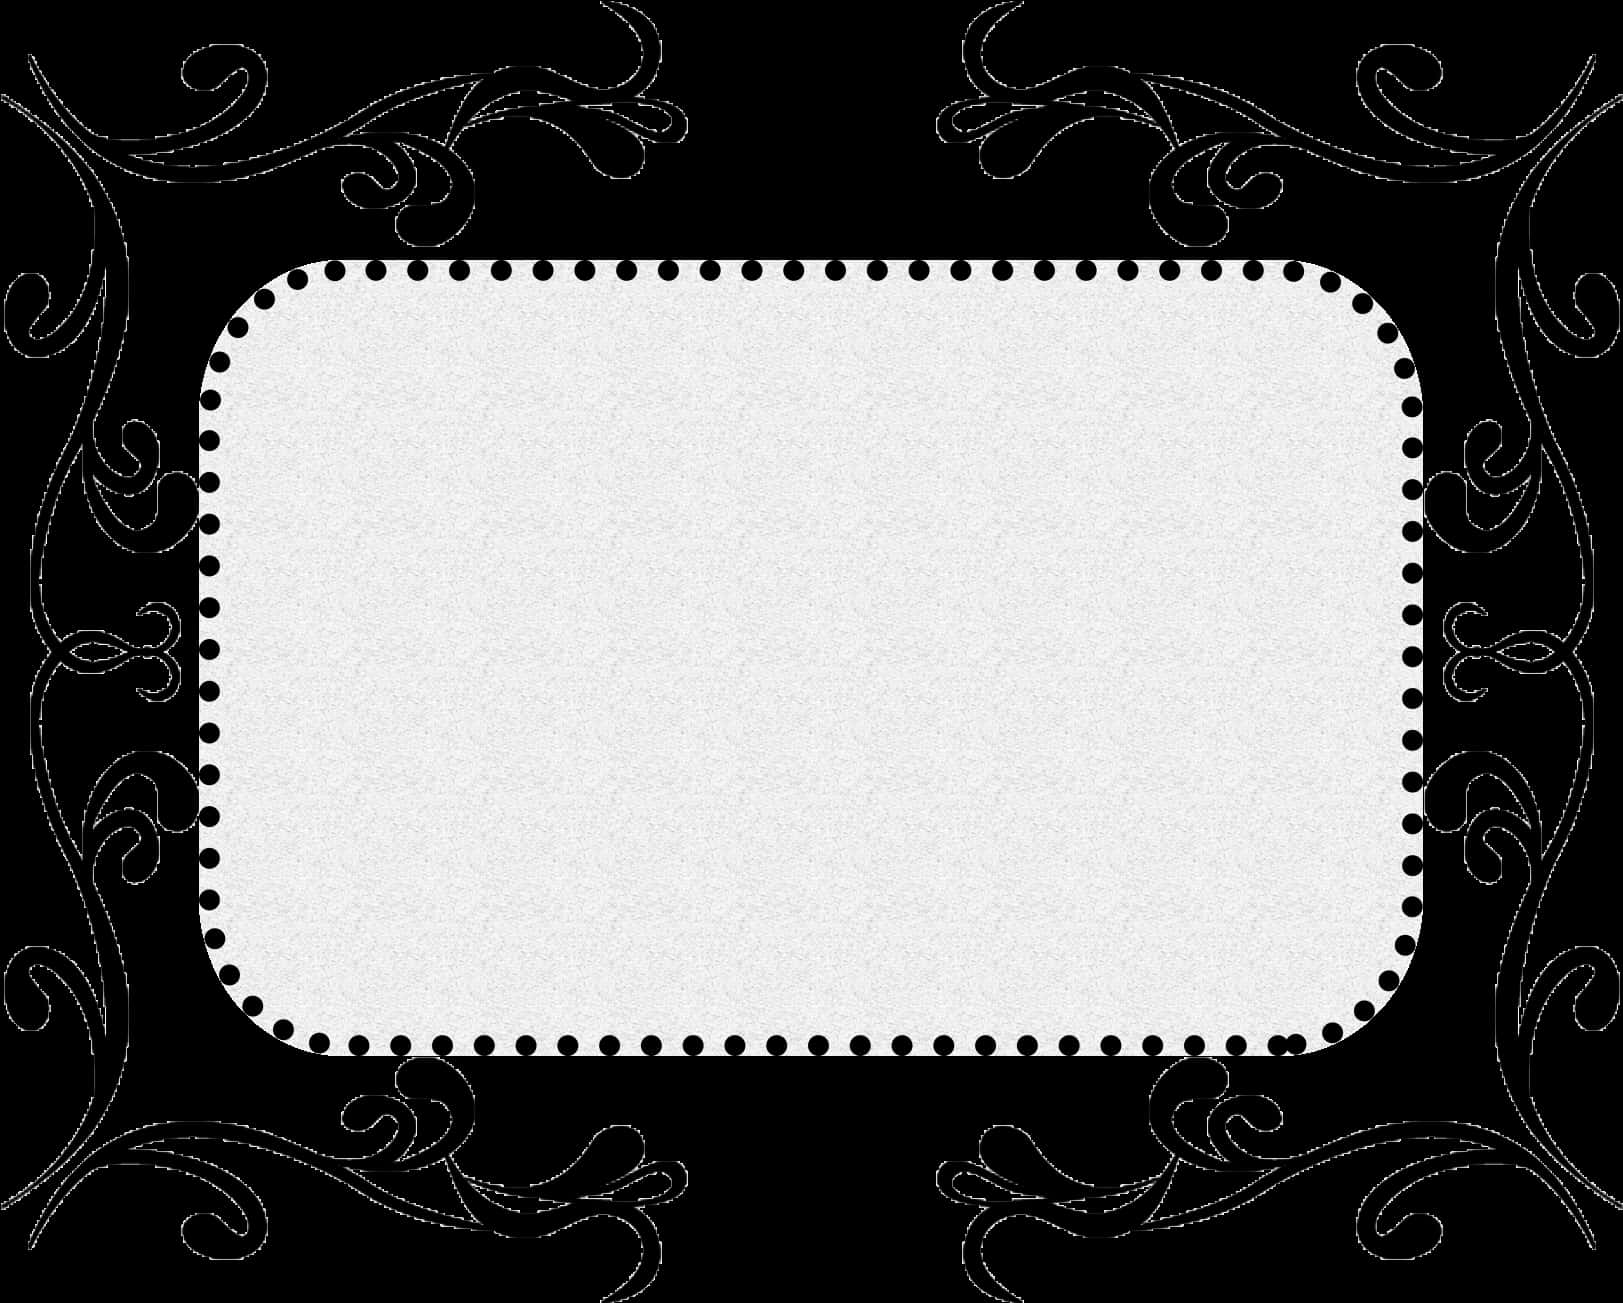 A Black And White Rectangular Frame With Black And White Swirls